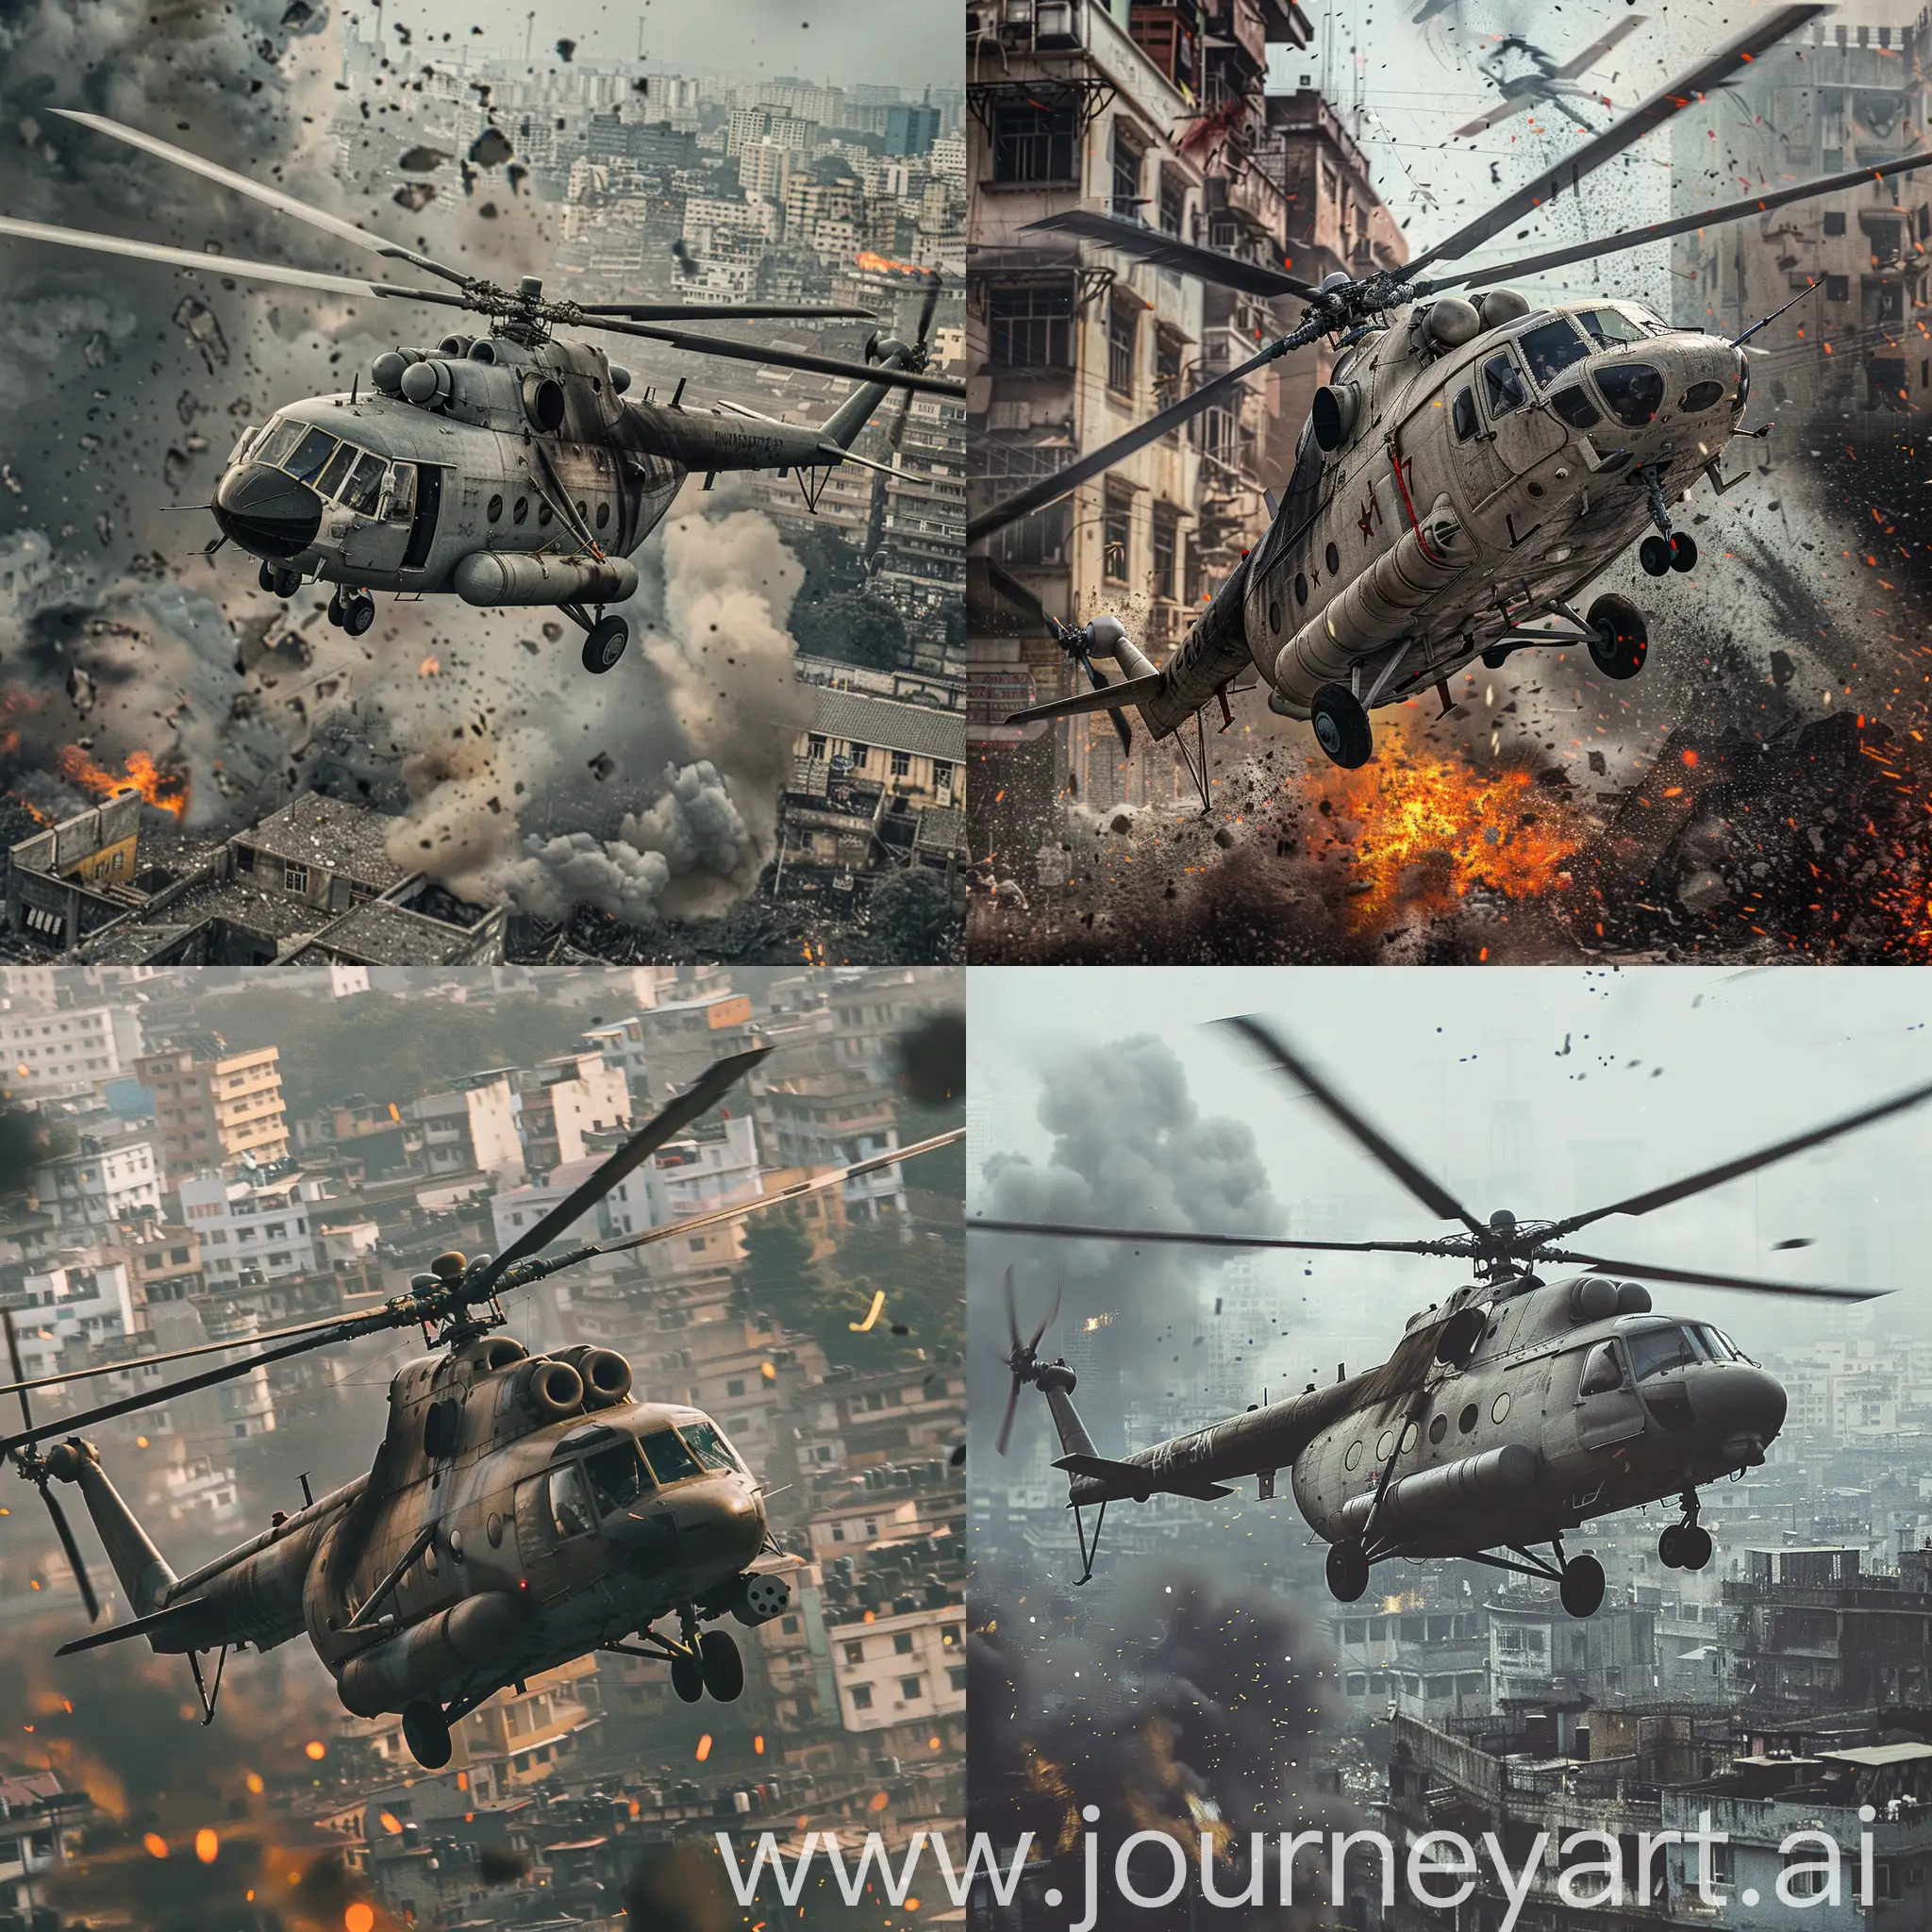 create an image of a photo of a Mi17 helicopter forcefully landing amidst the Kolkata urban area amidst heavy gunfire. make the image as if it's captured through a dslr.